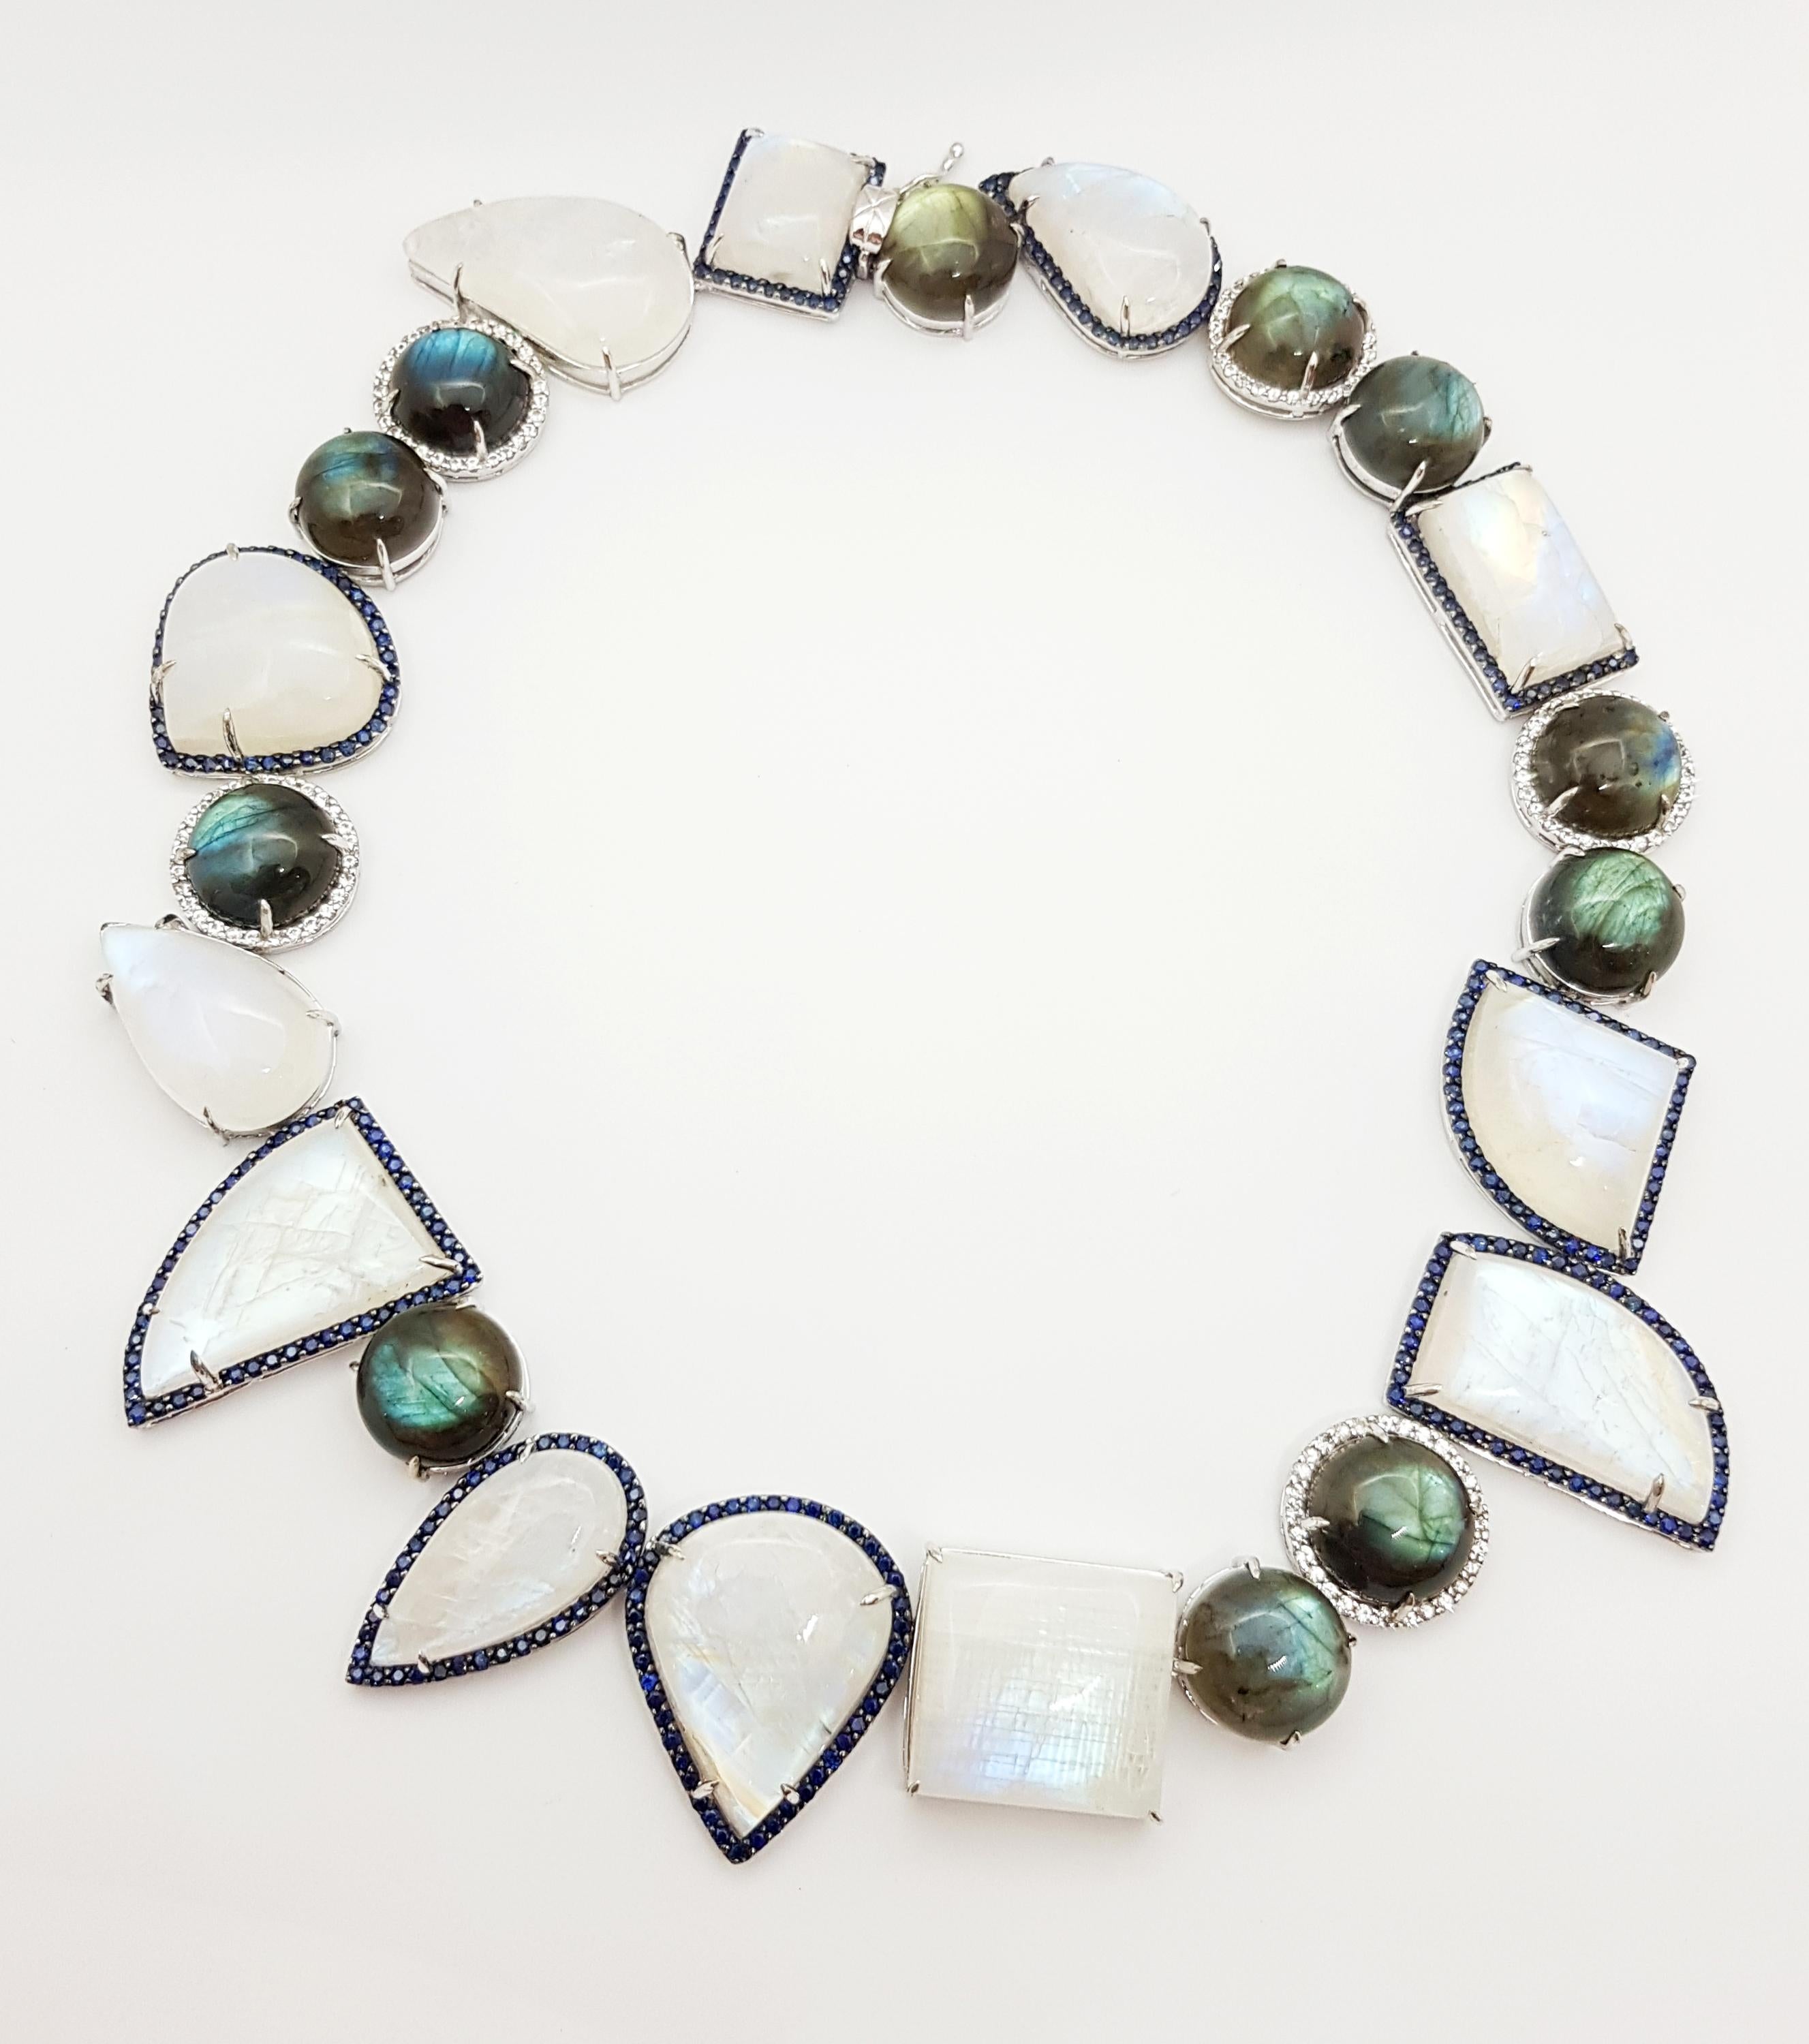 Moonstone , Labradorite, Blue Sapphire and White Sapphire Necklace set in Silver Settings

Width:  3.3 cm 
Length:  44.5 cm
Total Weight: 147.39 grams

*Please note that the silver setting is plated with rhodium to promote shine and help prevent